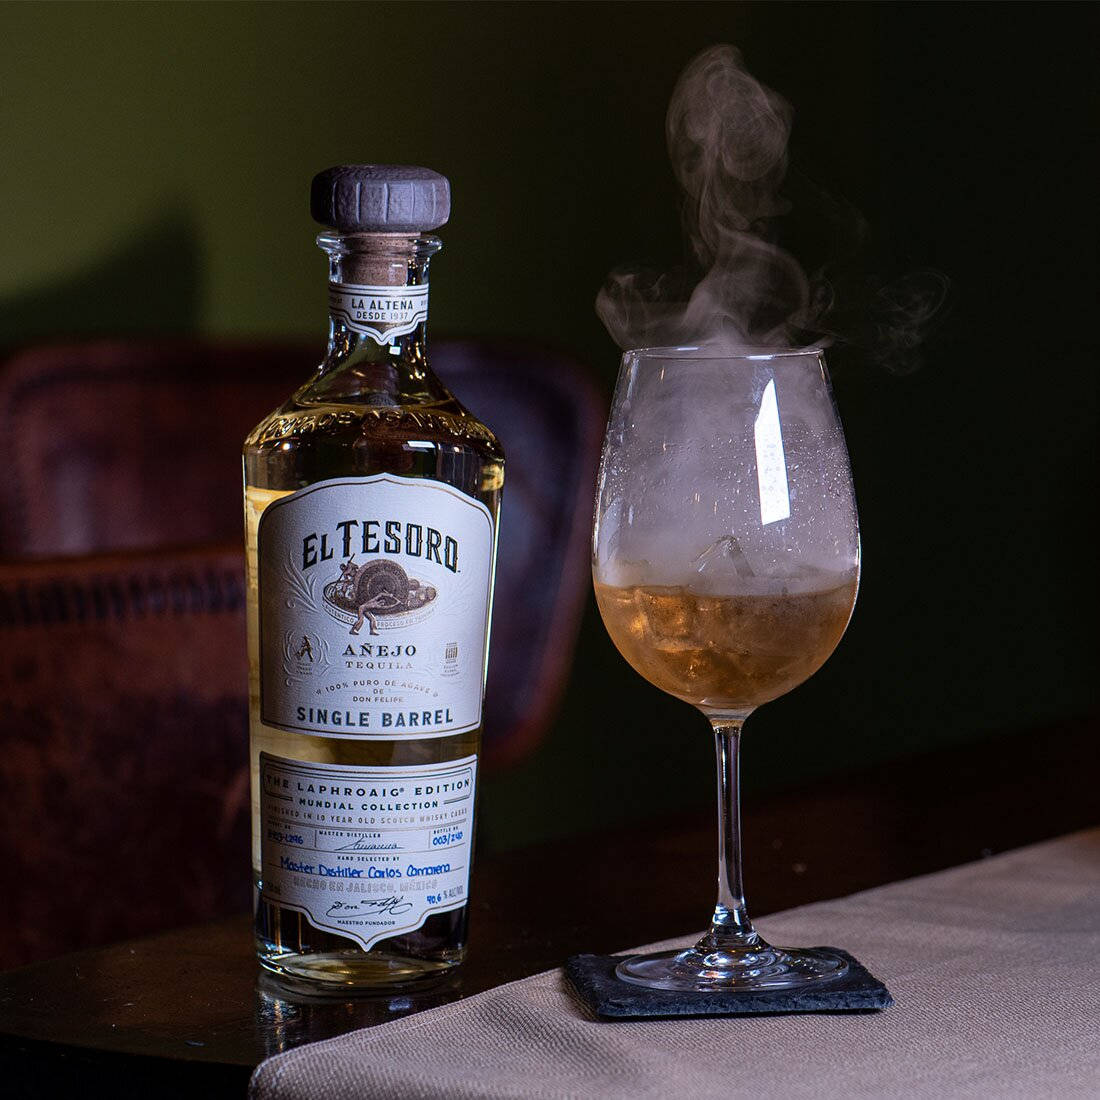 An exquisite bottle of El Tesoro Tequila showing its sophisticated charm in a smoky ambiance. Wallpaper